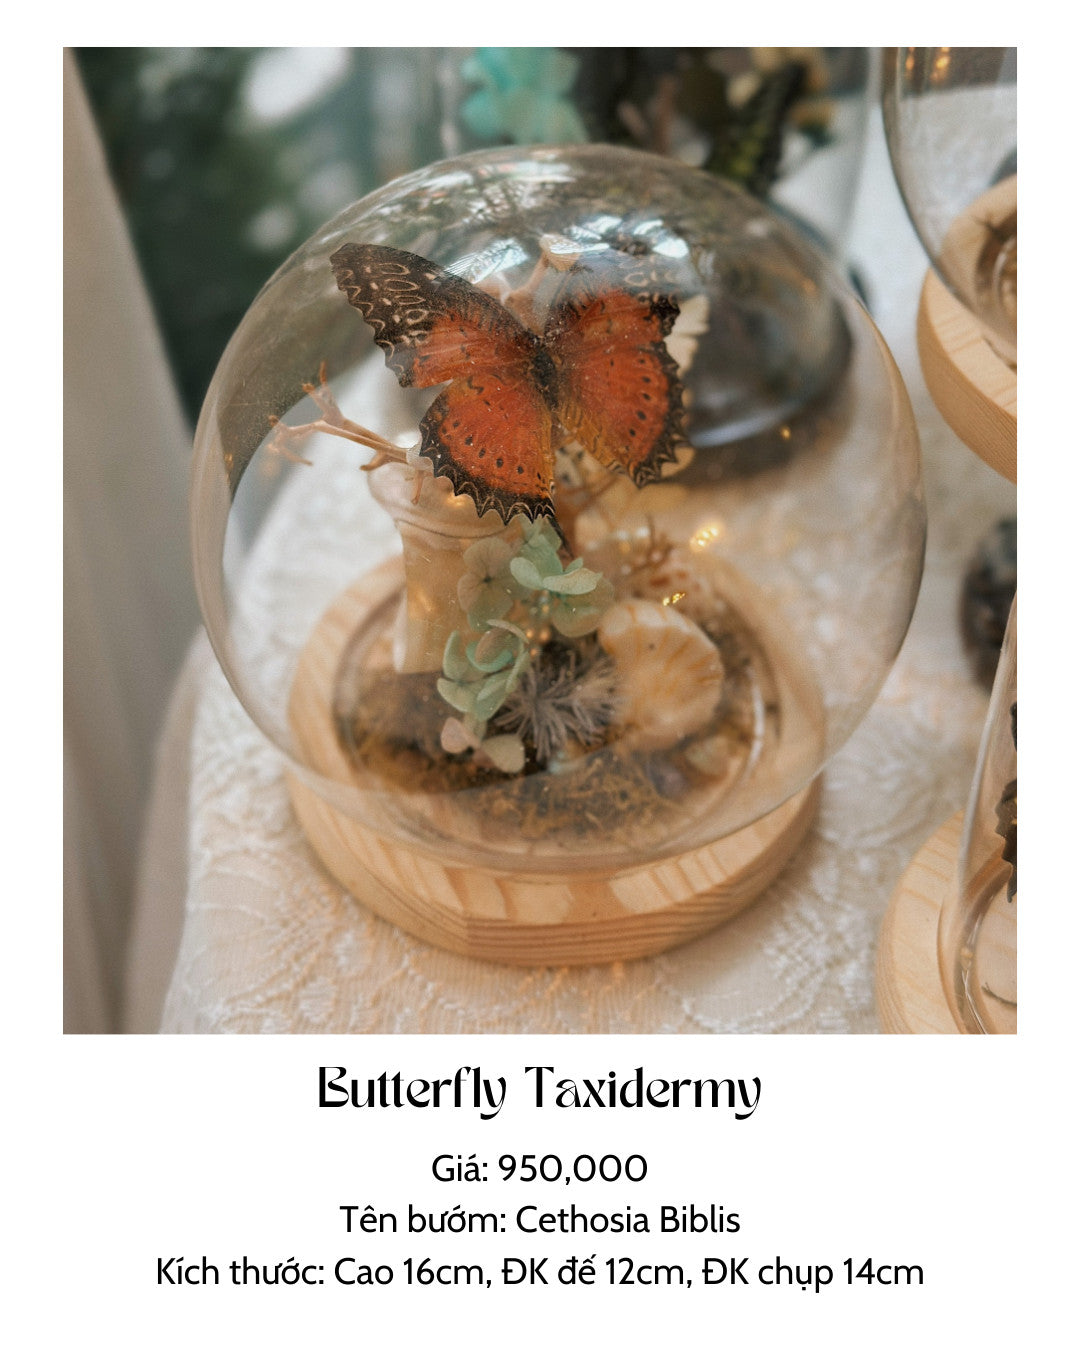 Butterfly Taxidermy by Magical Home Art